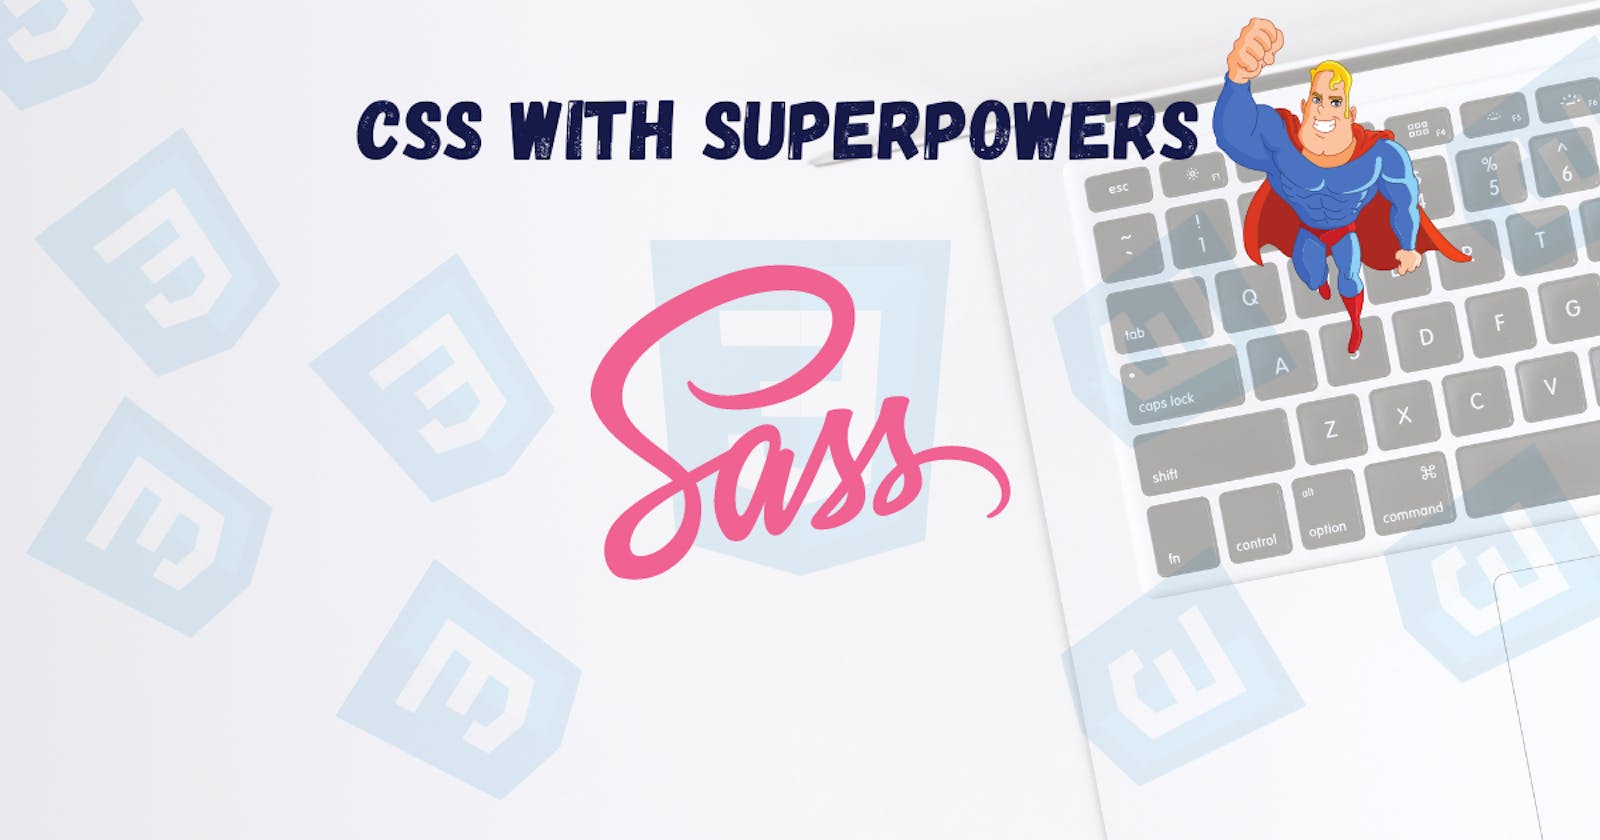 Write CSS with Superpowers
Using Sass.